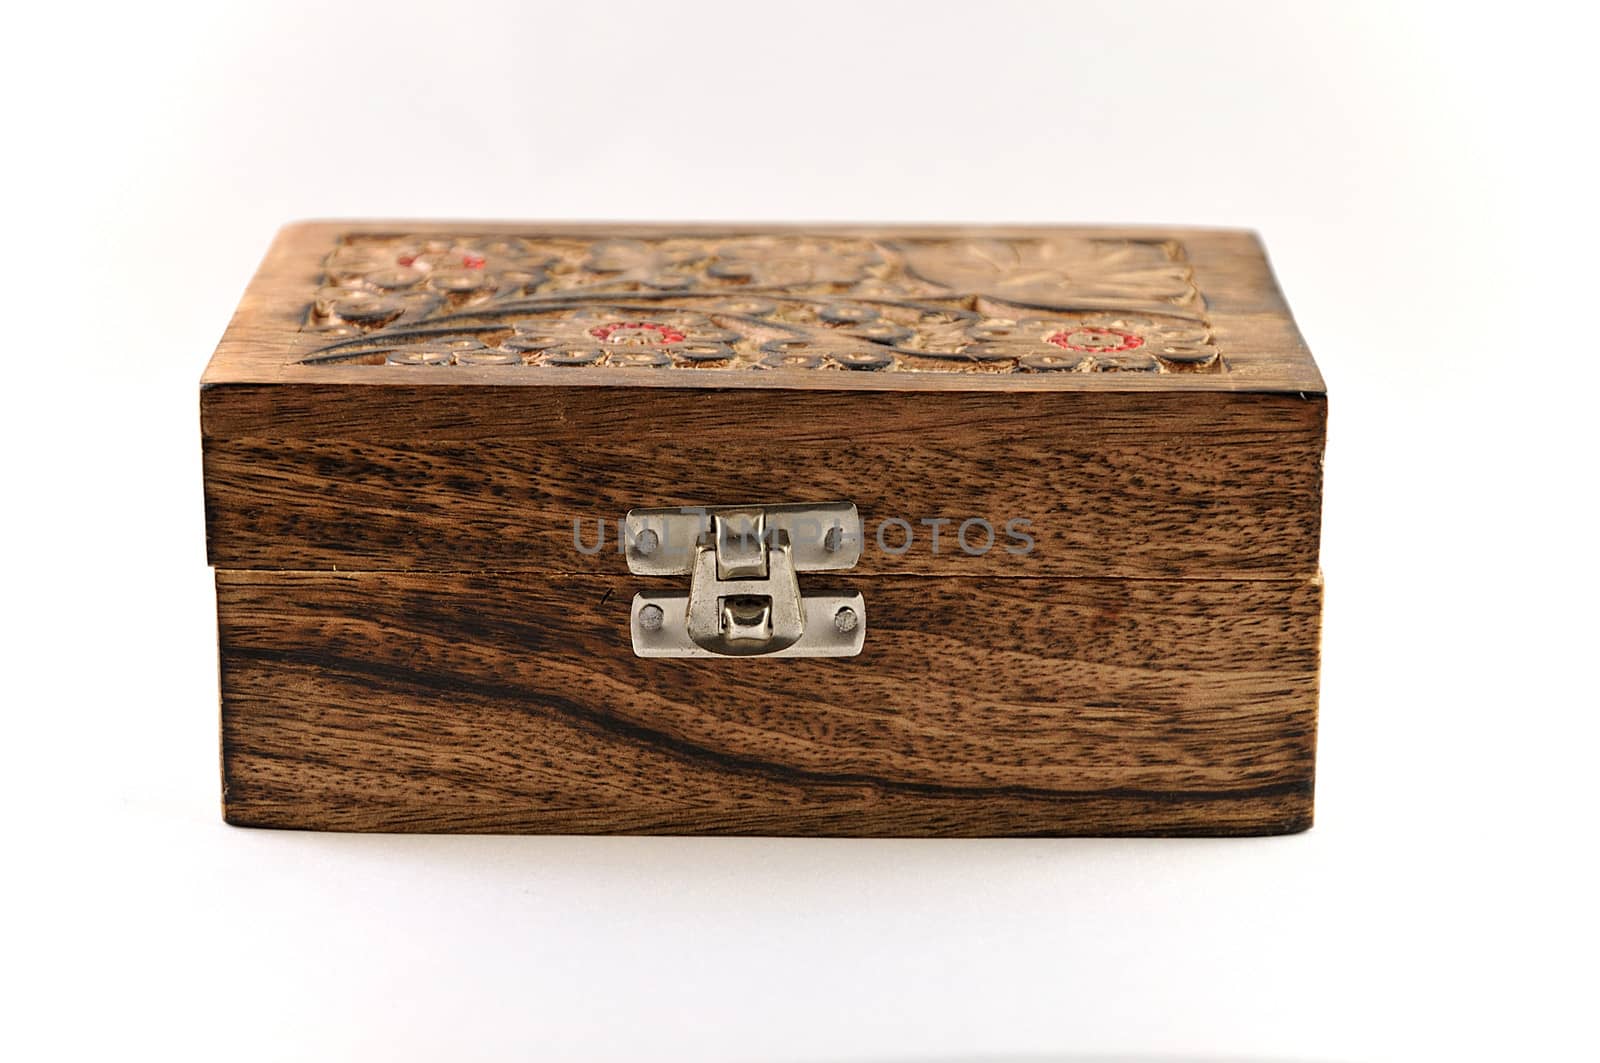 very nice wooden box to store all